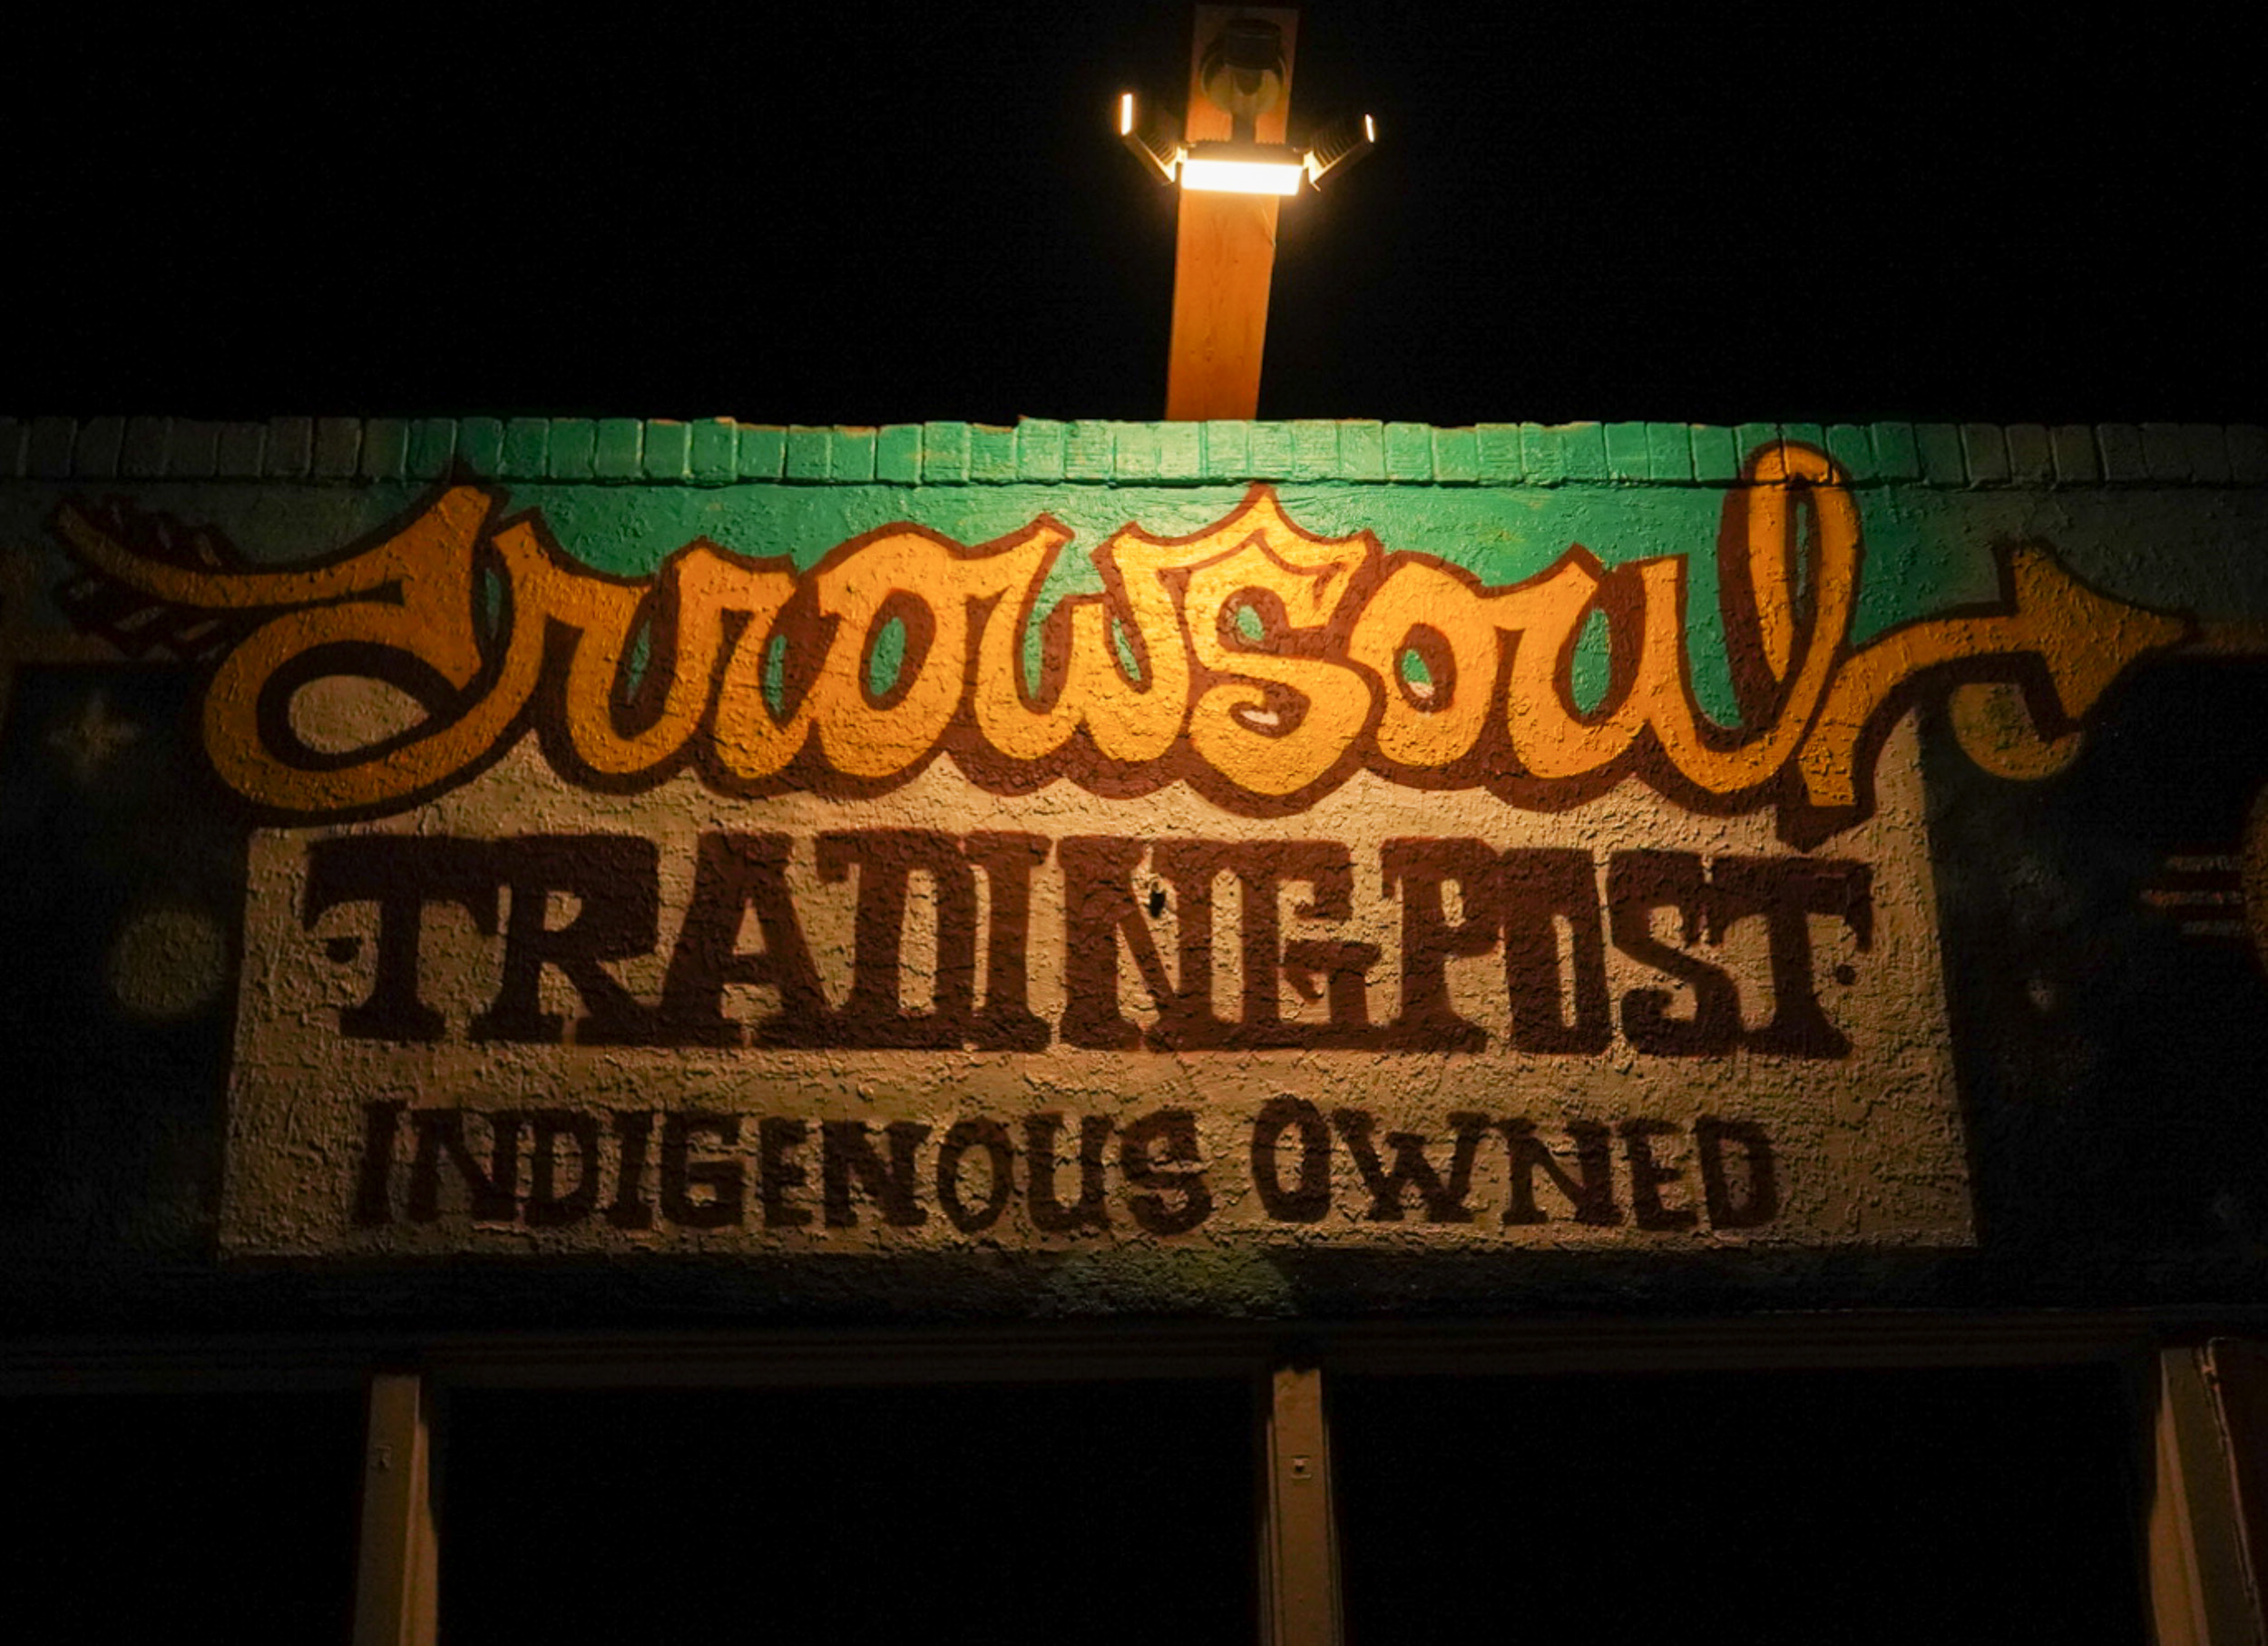 Arrowsoul Trading Post is an Indigenous-owned art collective that has hosted hardcore shows.